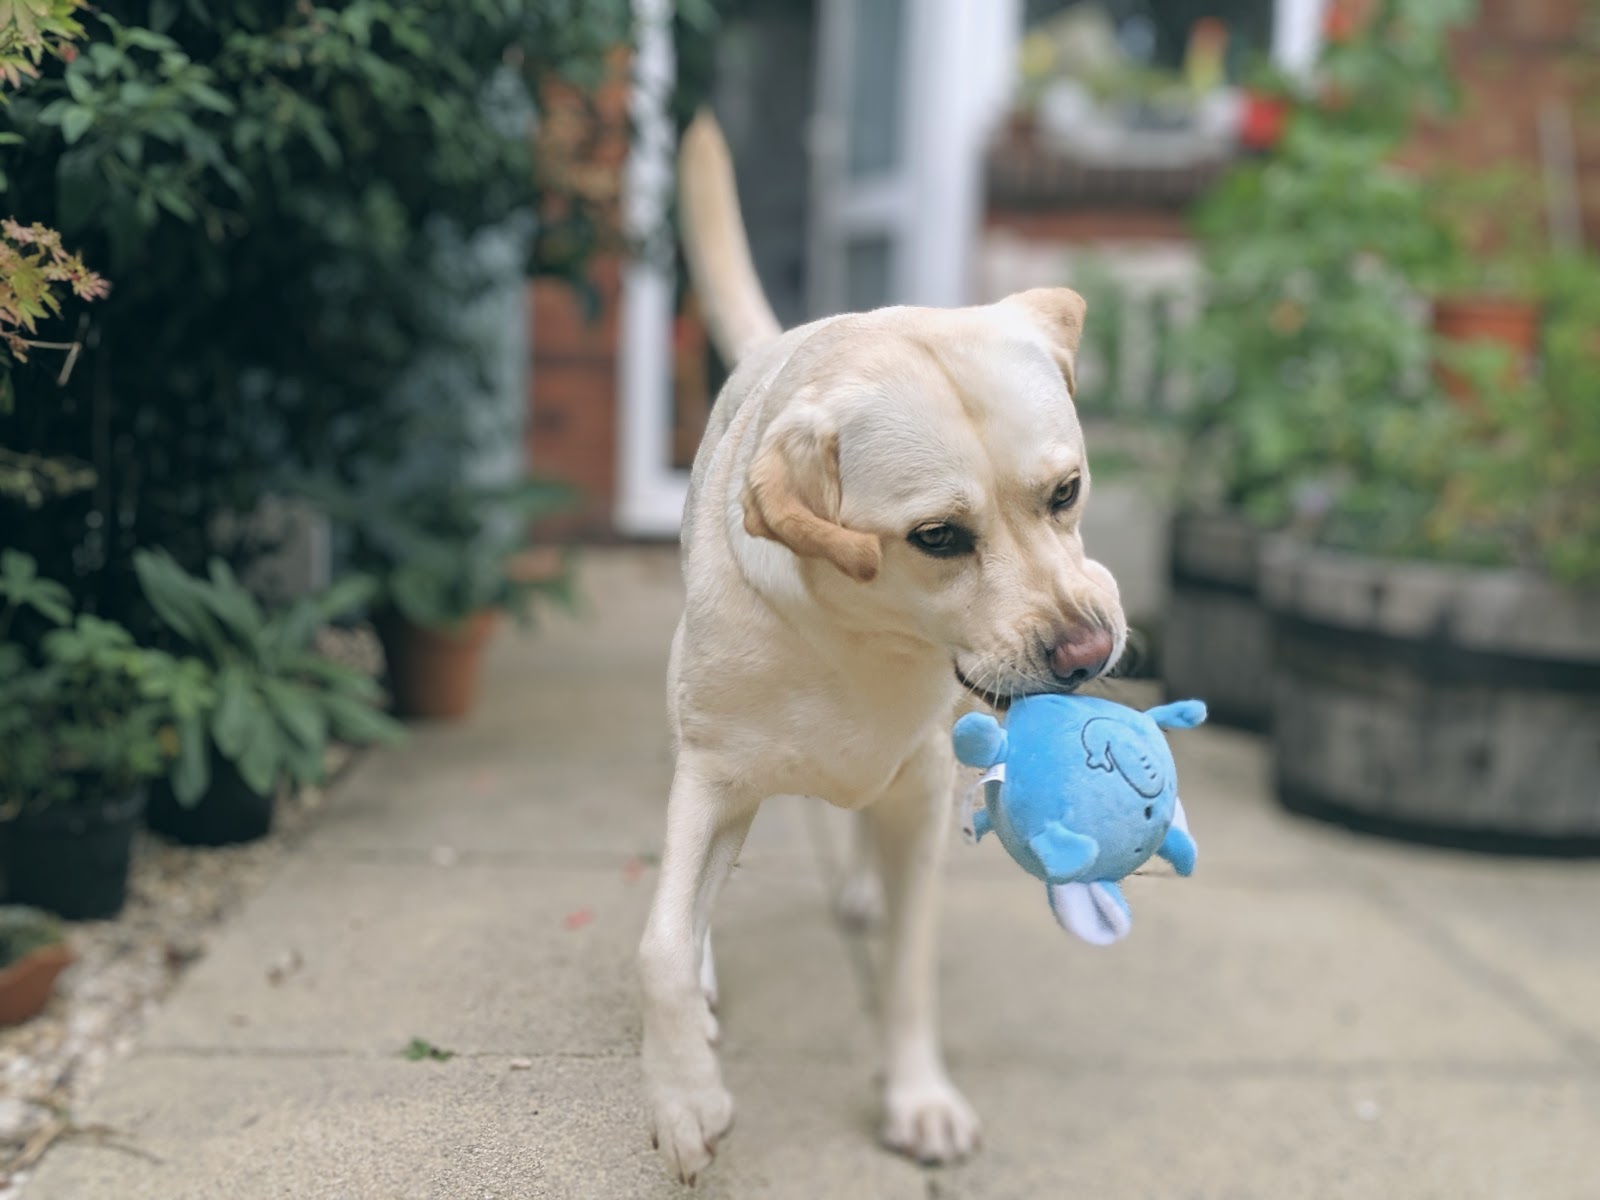 Scully the Labrador with blue elephant toy